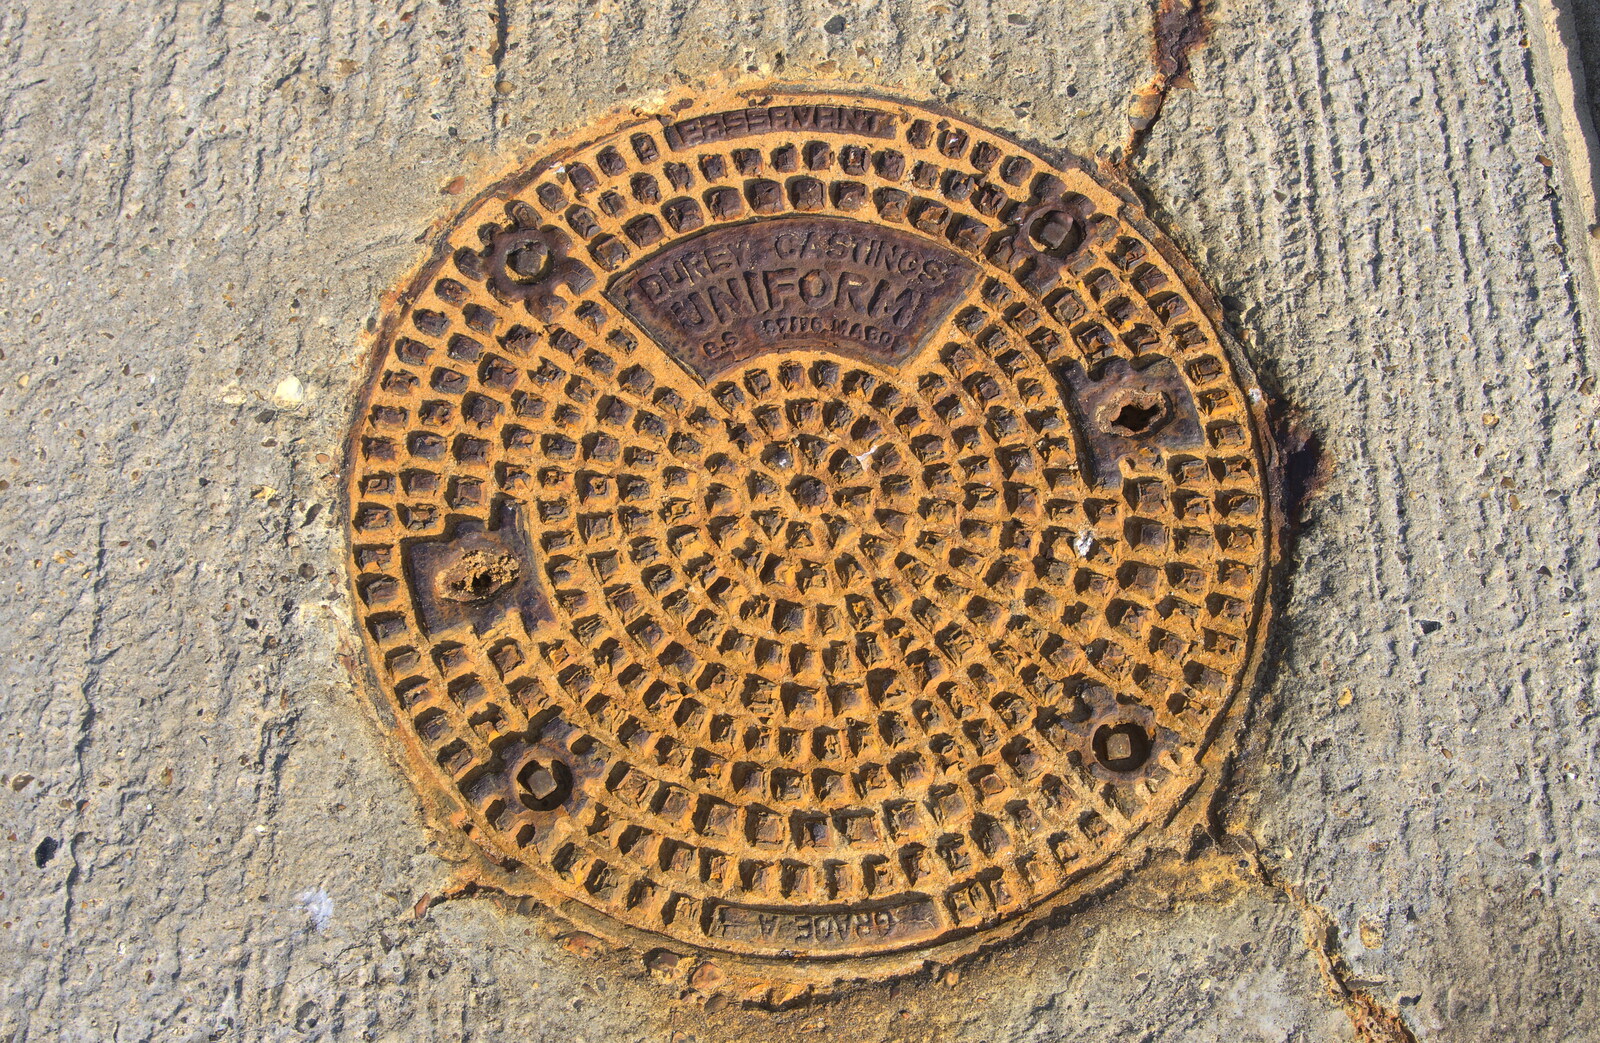 Another rusted manhole cover from A DC3 Quiz and the Alfred Corry, Southwold, Suffolk, - 9th October 2015